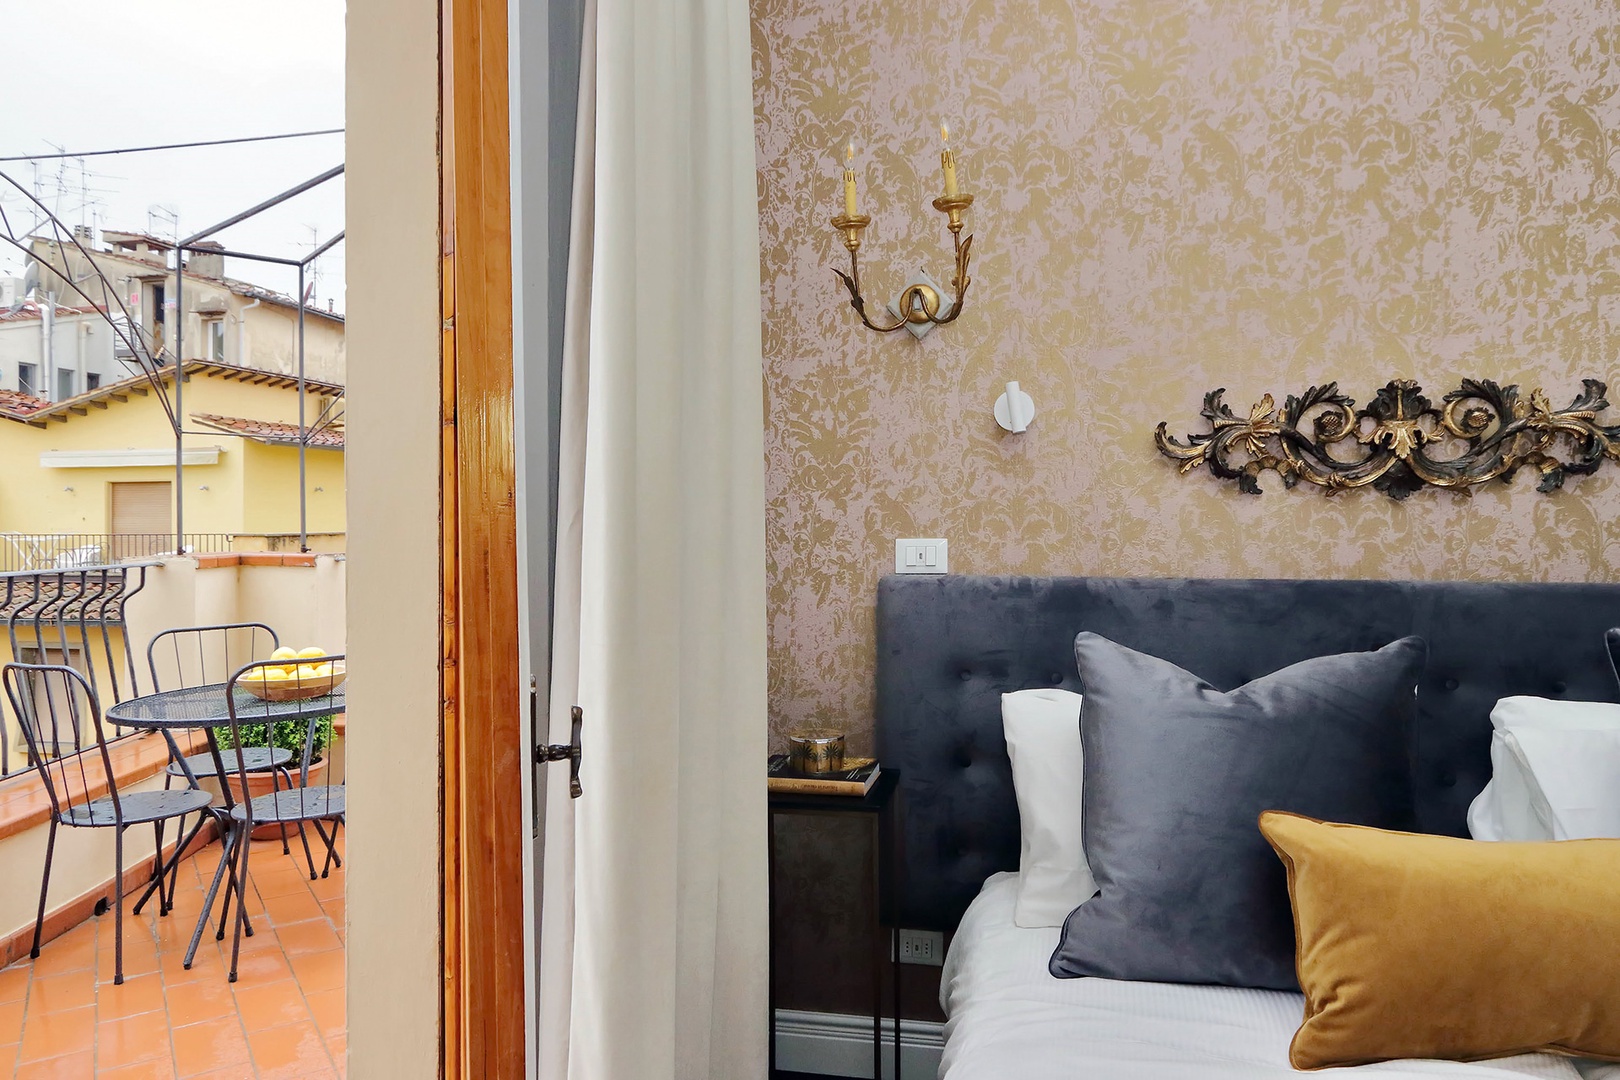 Start your day by stepping out into the Italian sunshine on your private balcony.